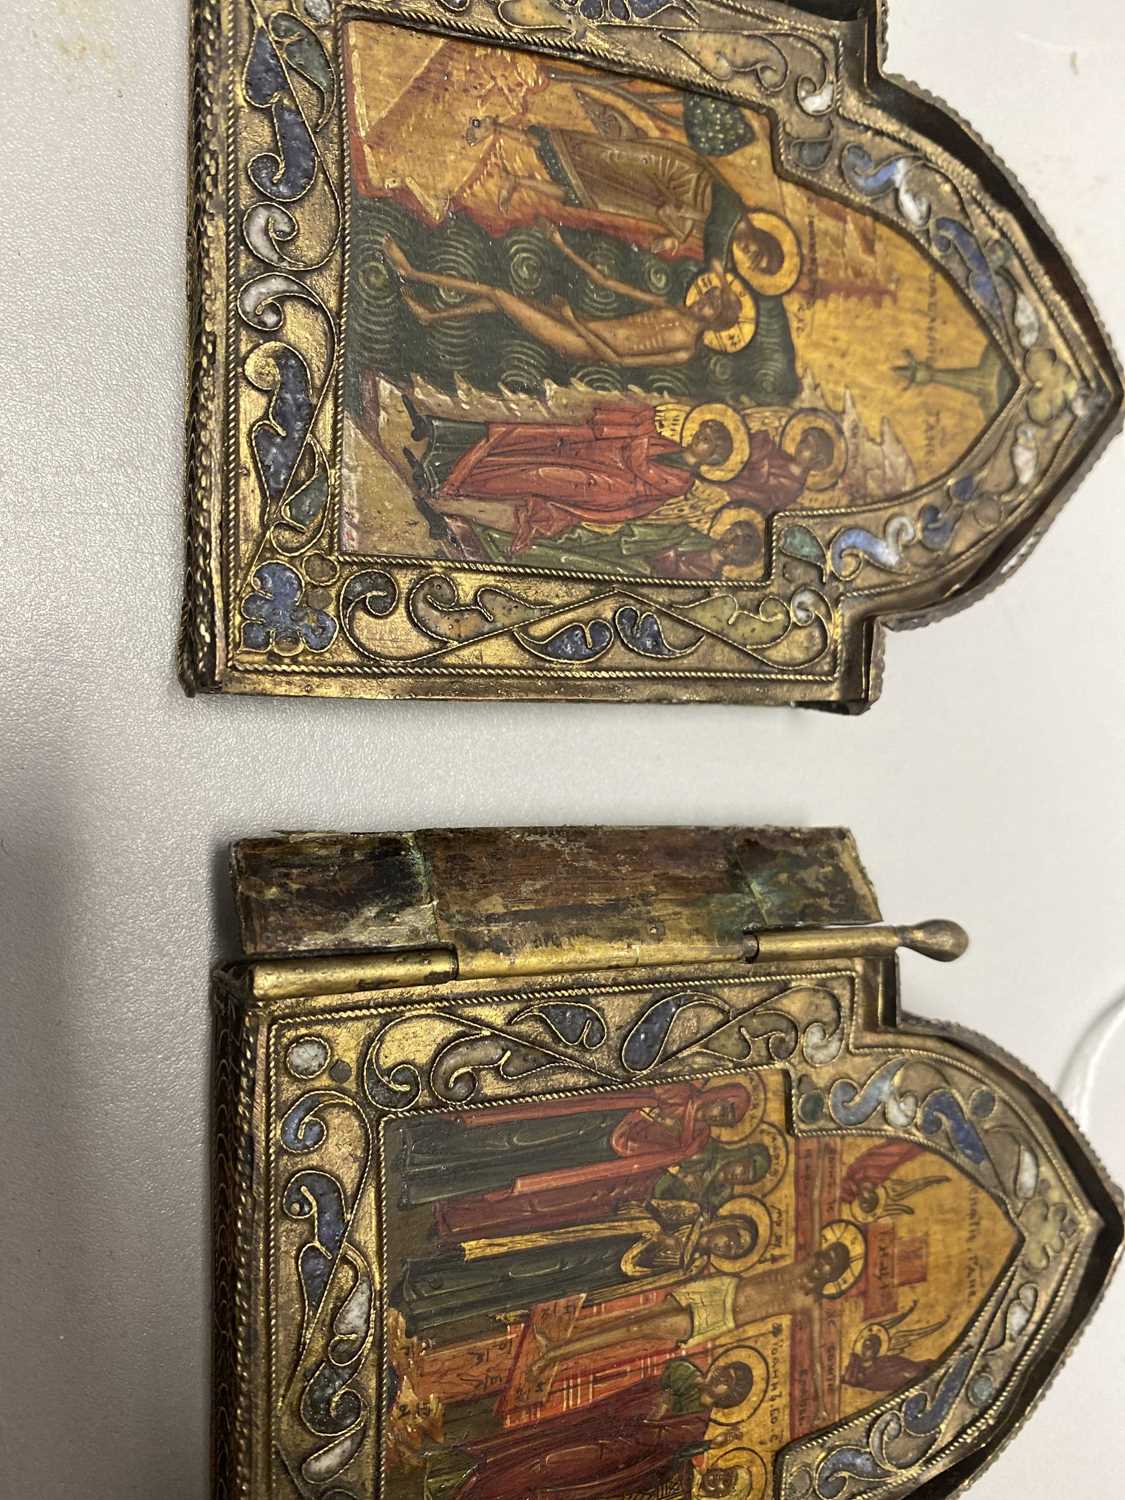 A champleve enamel diptych Christian icon - Image 8 of 9